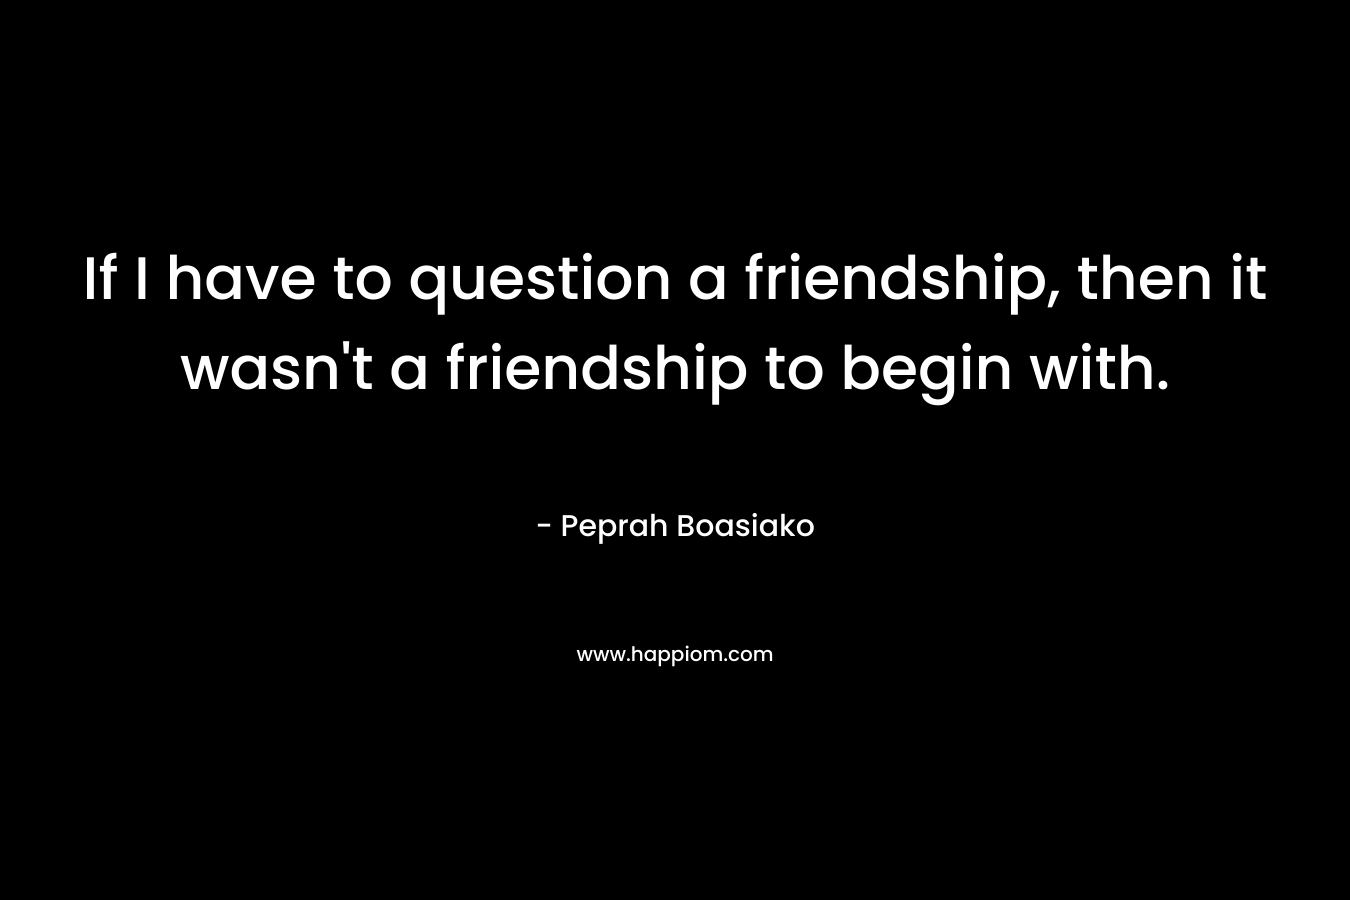 If I have to question a friendship, then it wasn’t a friendship to begin with. – Peprah Boasiako